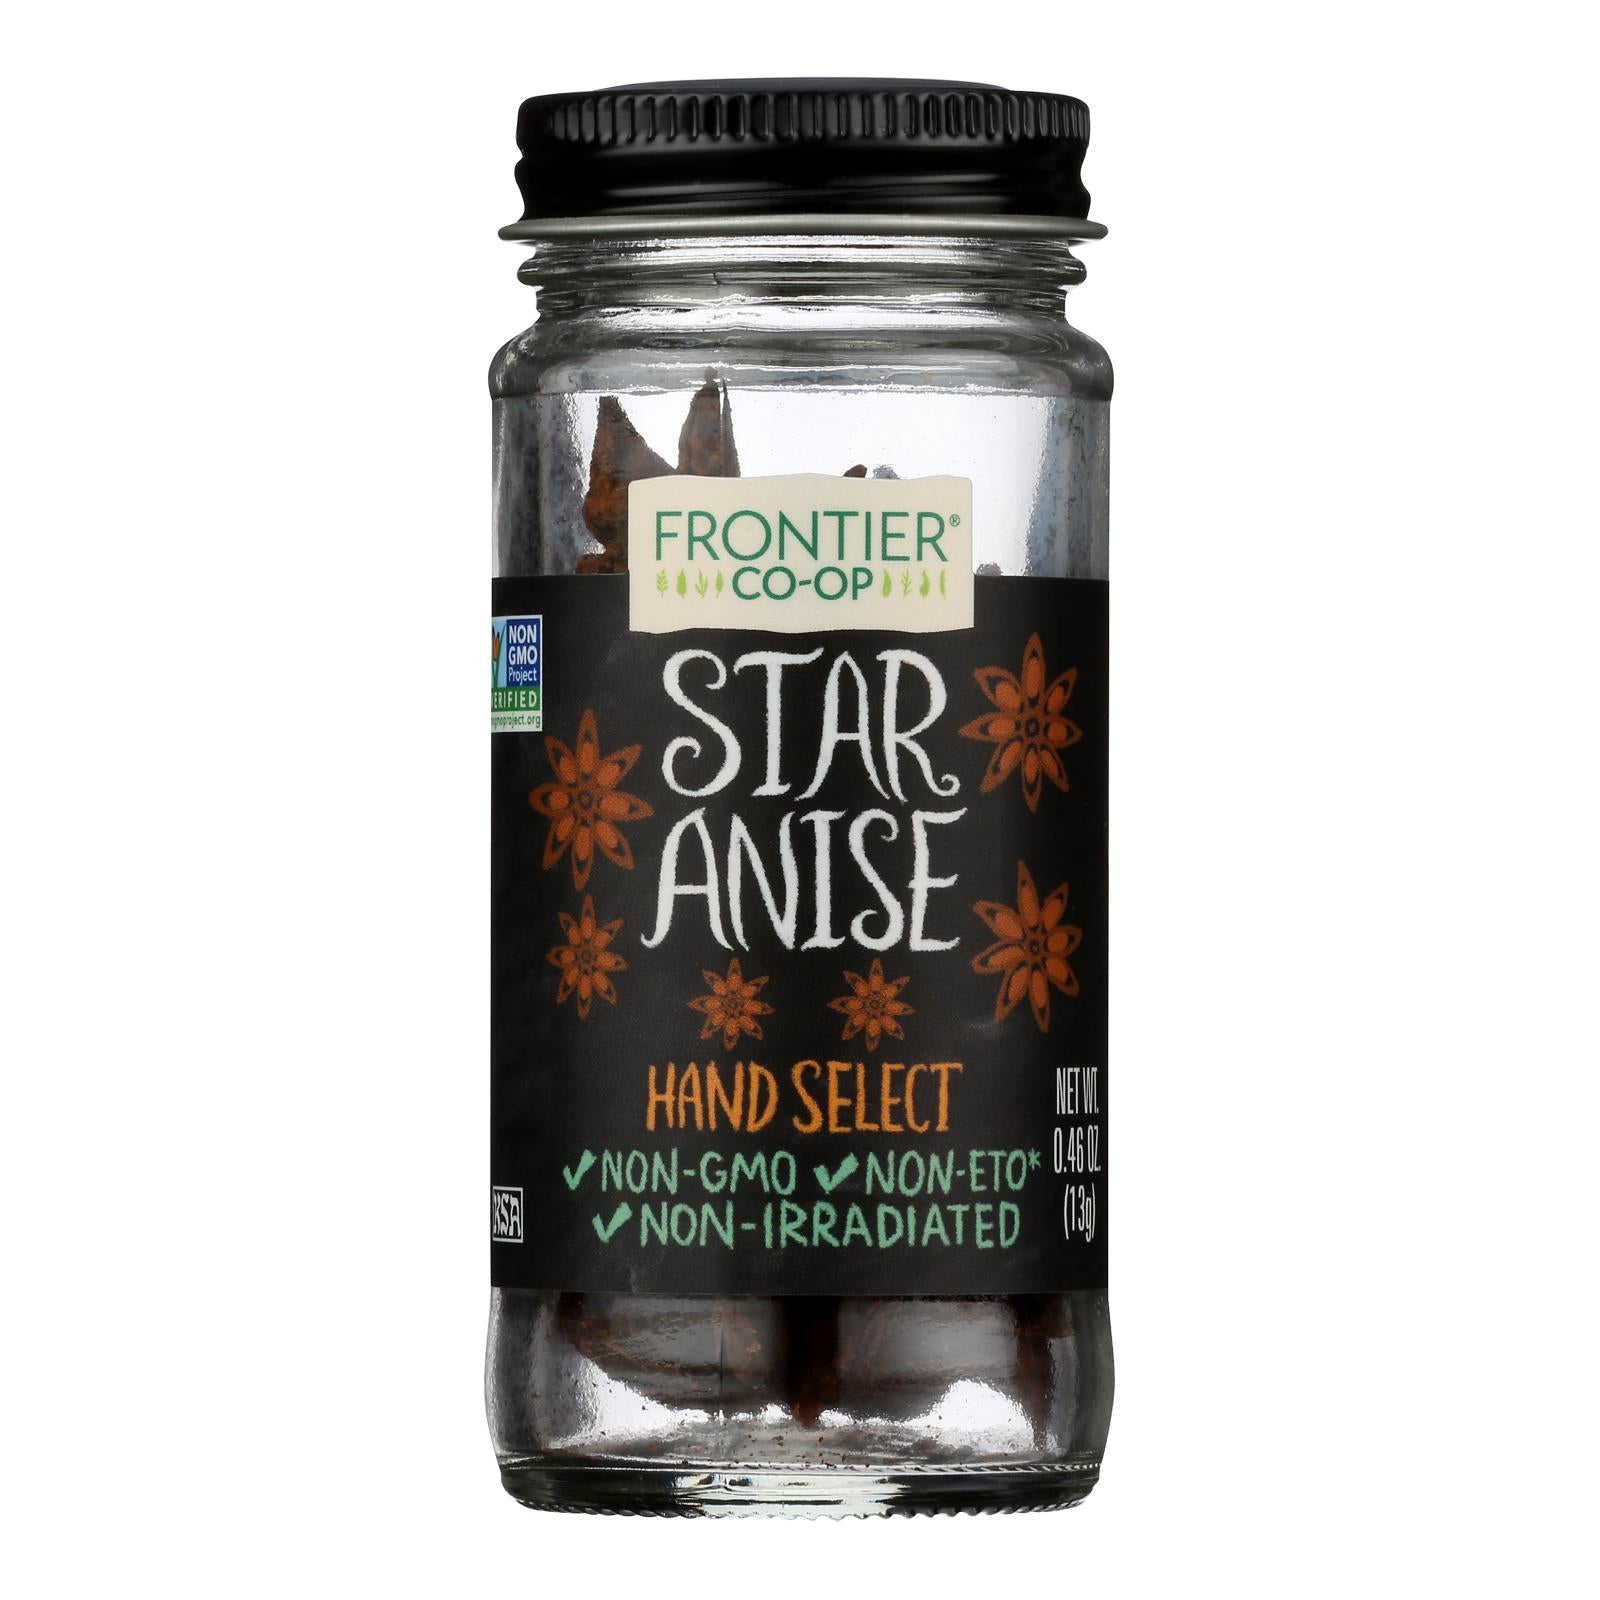 Frontier Natural Products Coop - Star Anise Hand Select - 1 Each -.46 Oz